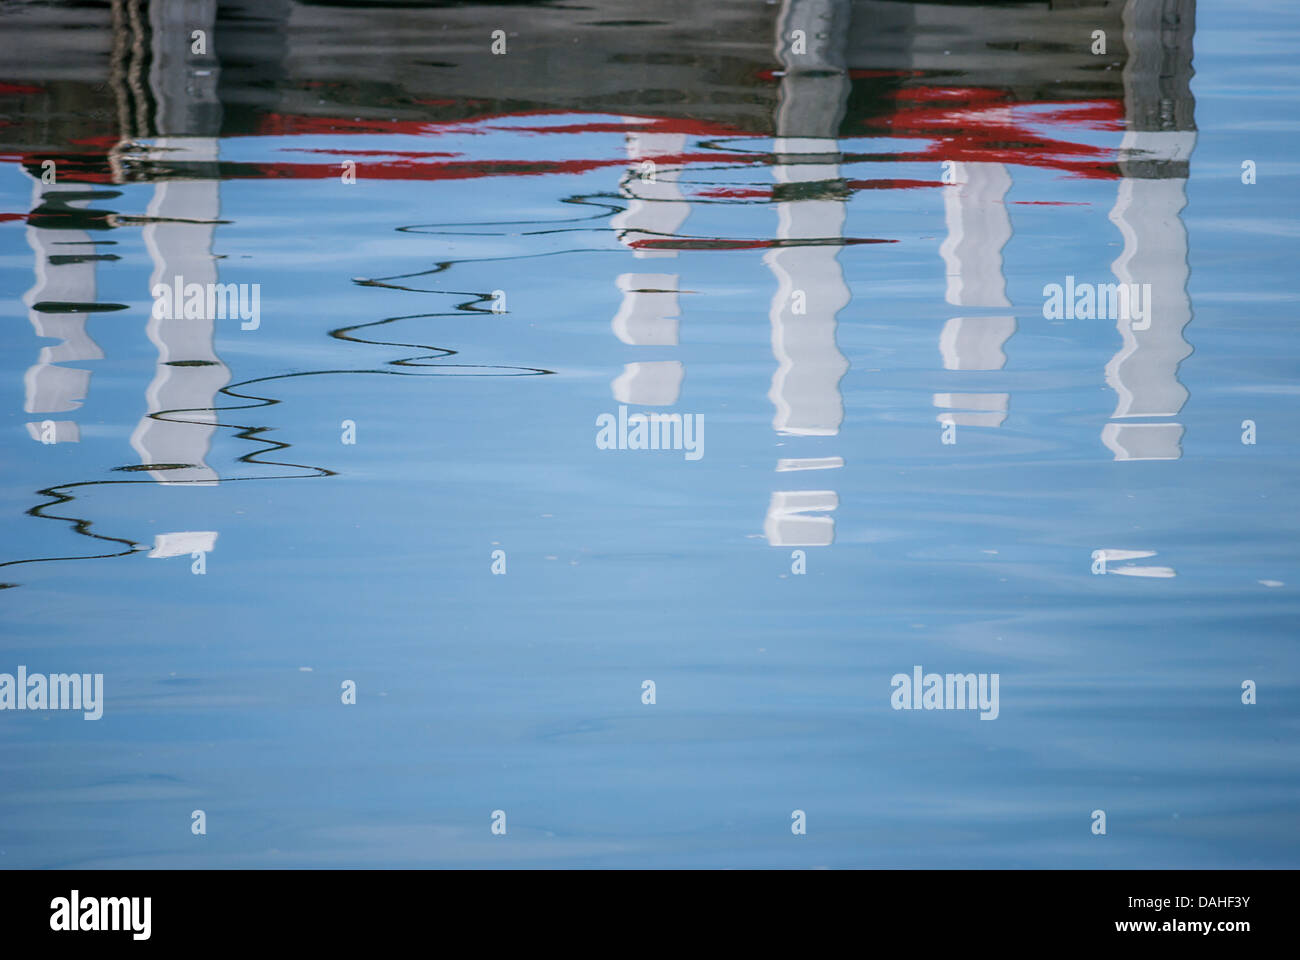 Abstract images of reflections of a boat marina in the rippling water of a harbour. Stock Photo